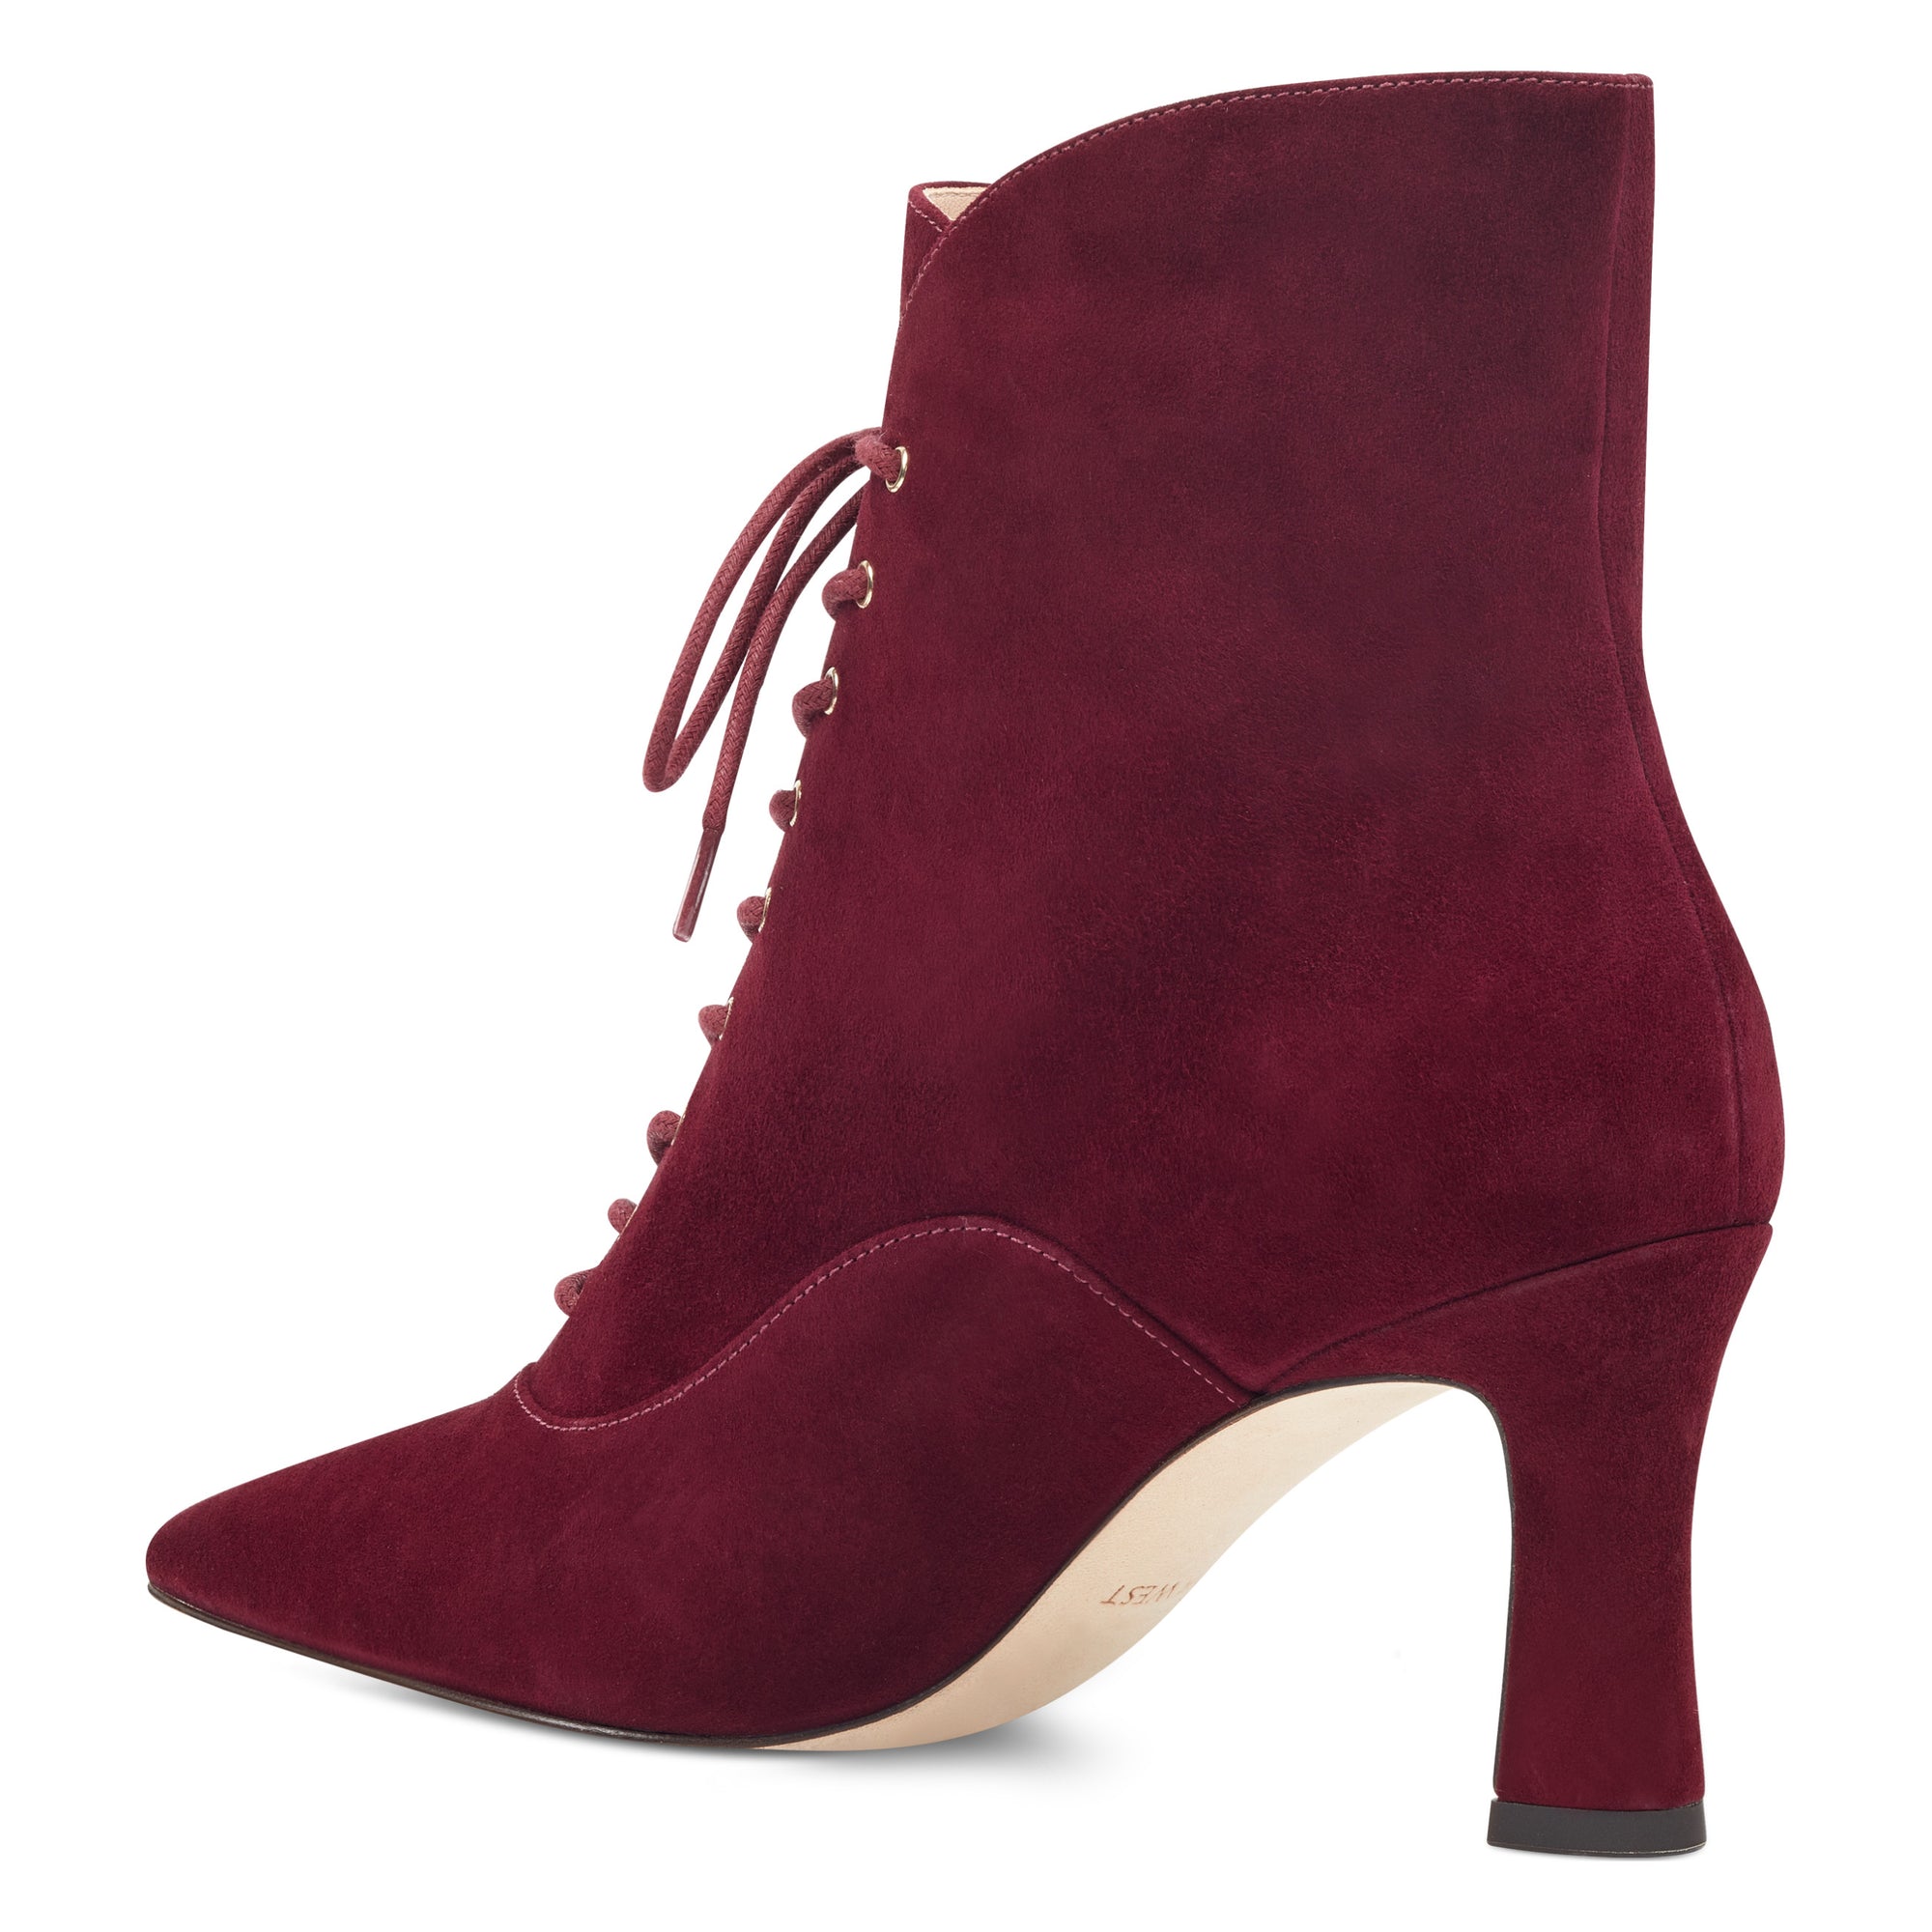 Callah Lace Up Booties - Nine West